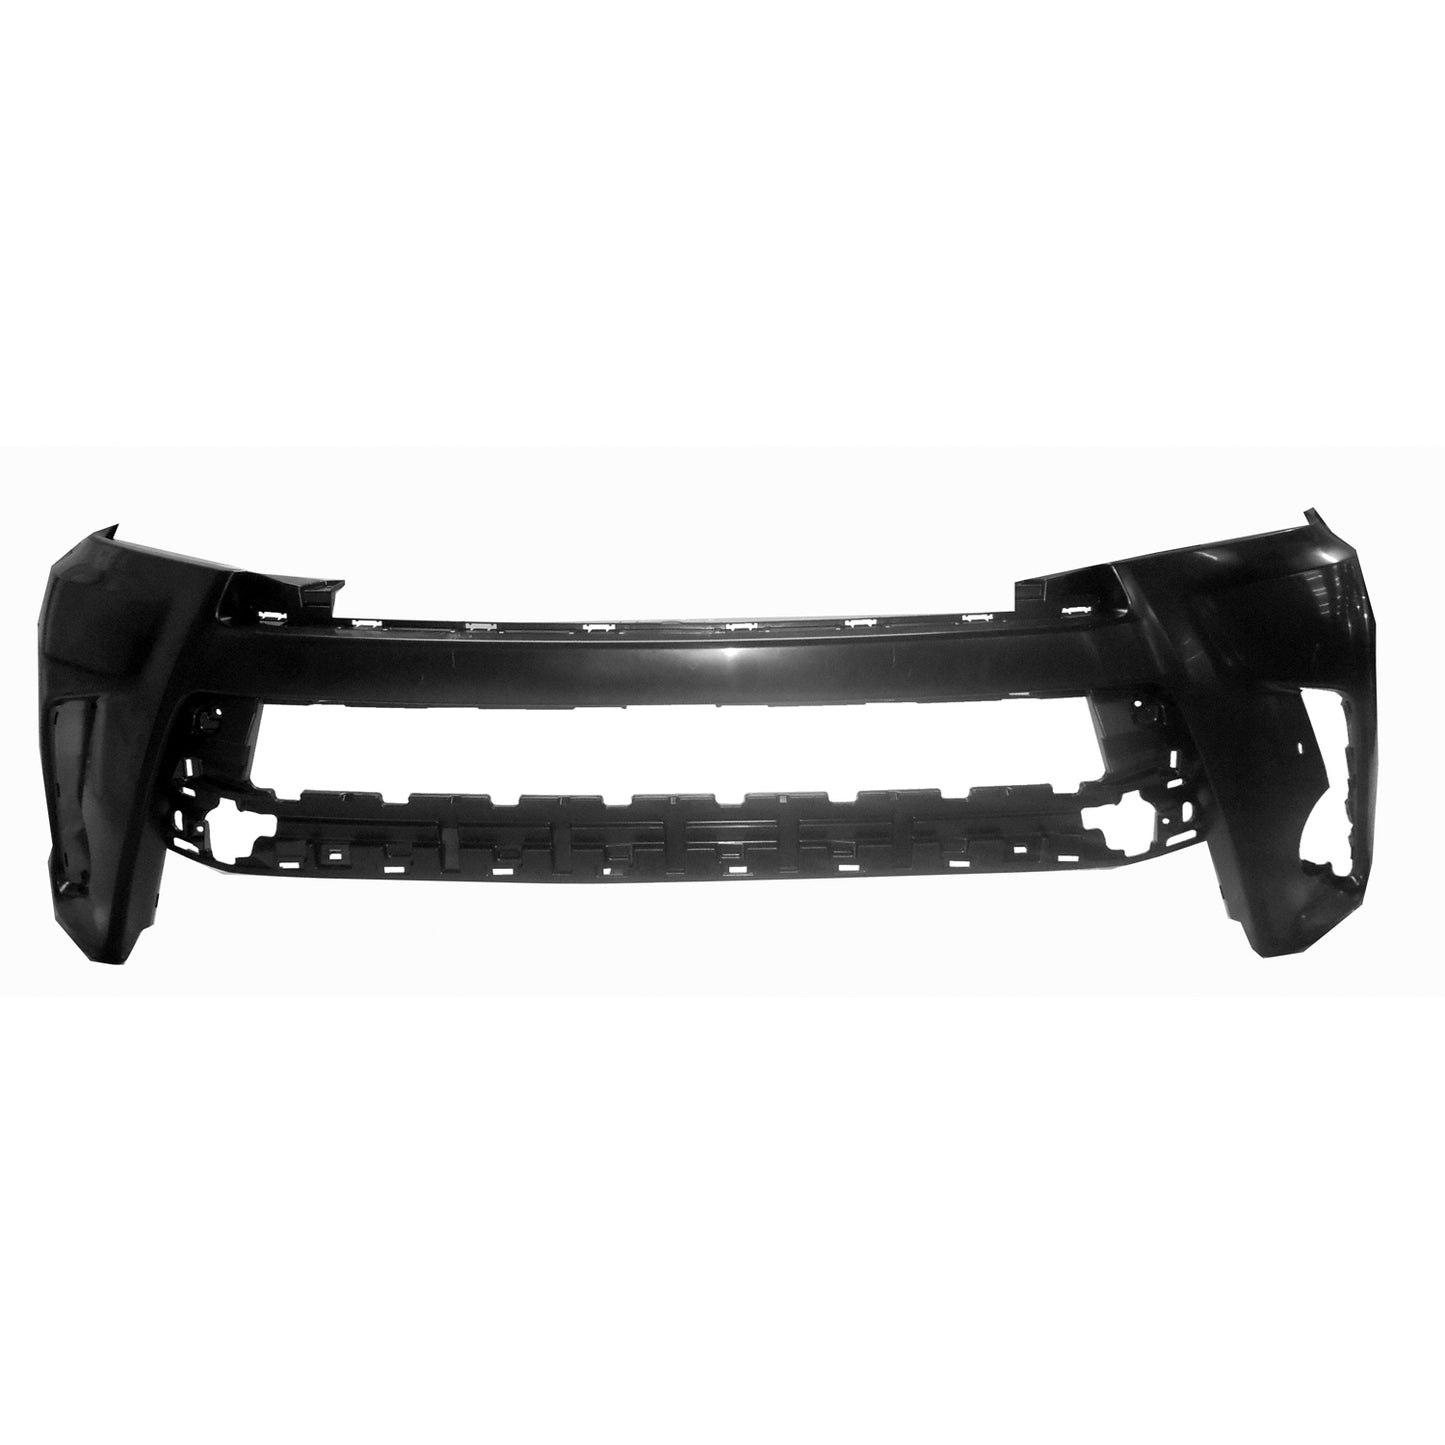 1000 | 2017-2019 TOYOTA HIGHLANDER Front bumper cover w/Object Sensors; prime | TO1000428|521190E938